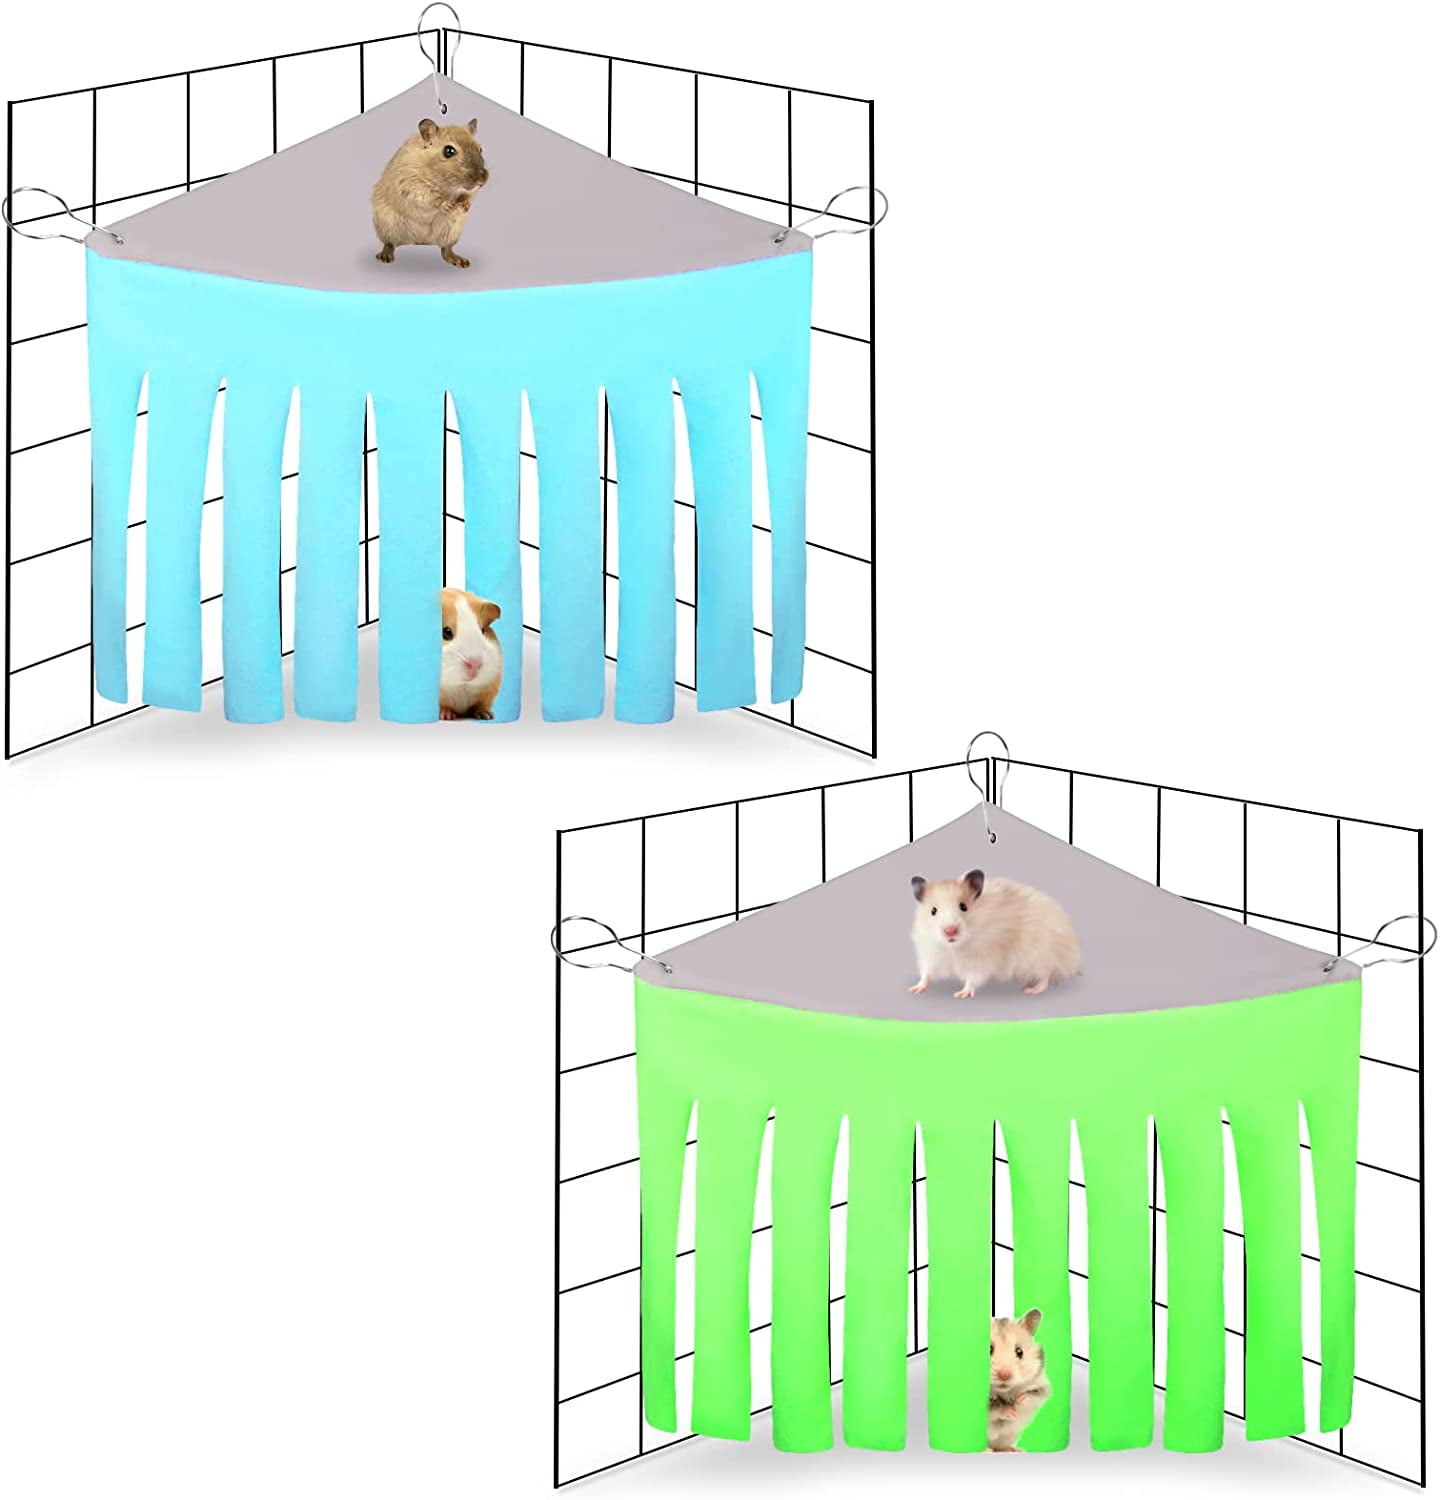 Rat Cage Habitat Decor Accessories Real Hamster Bridge Seesaw Pet Mouse Swing for Small Animal Sugar Glider Syrian Hedgehog DuvinDD Hamster House with Running Wheel Wooden Gerbil Toys 